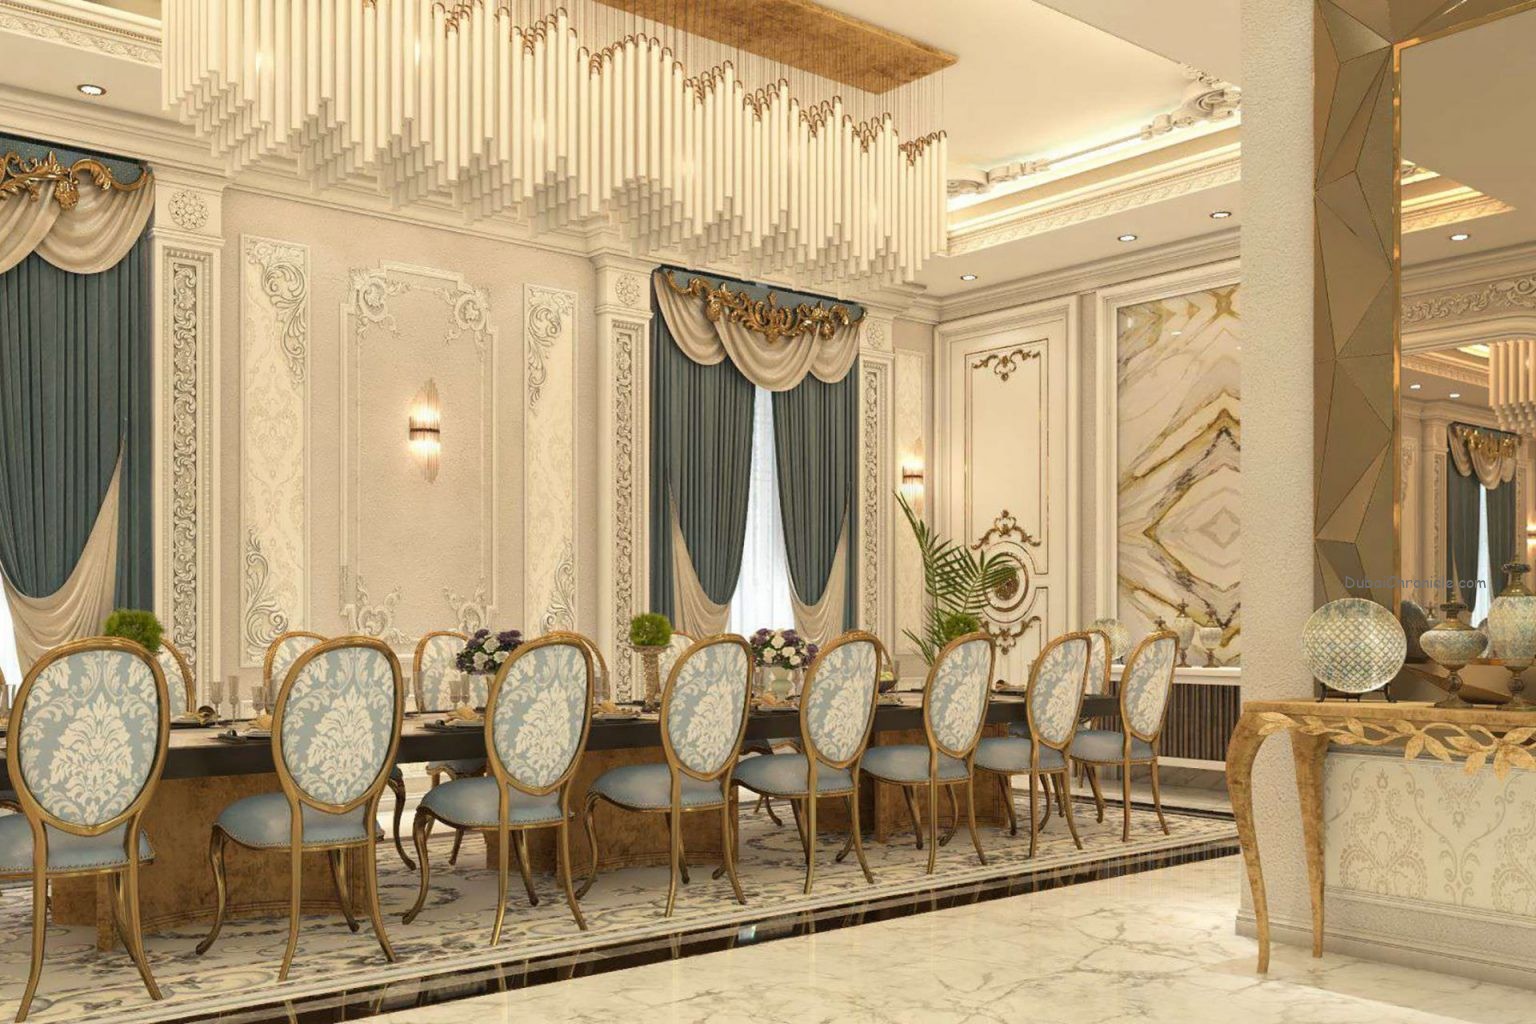 Art Deco Design is renowned for their superior work in all areas of interior and architectural design.